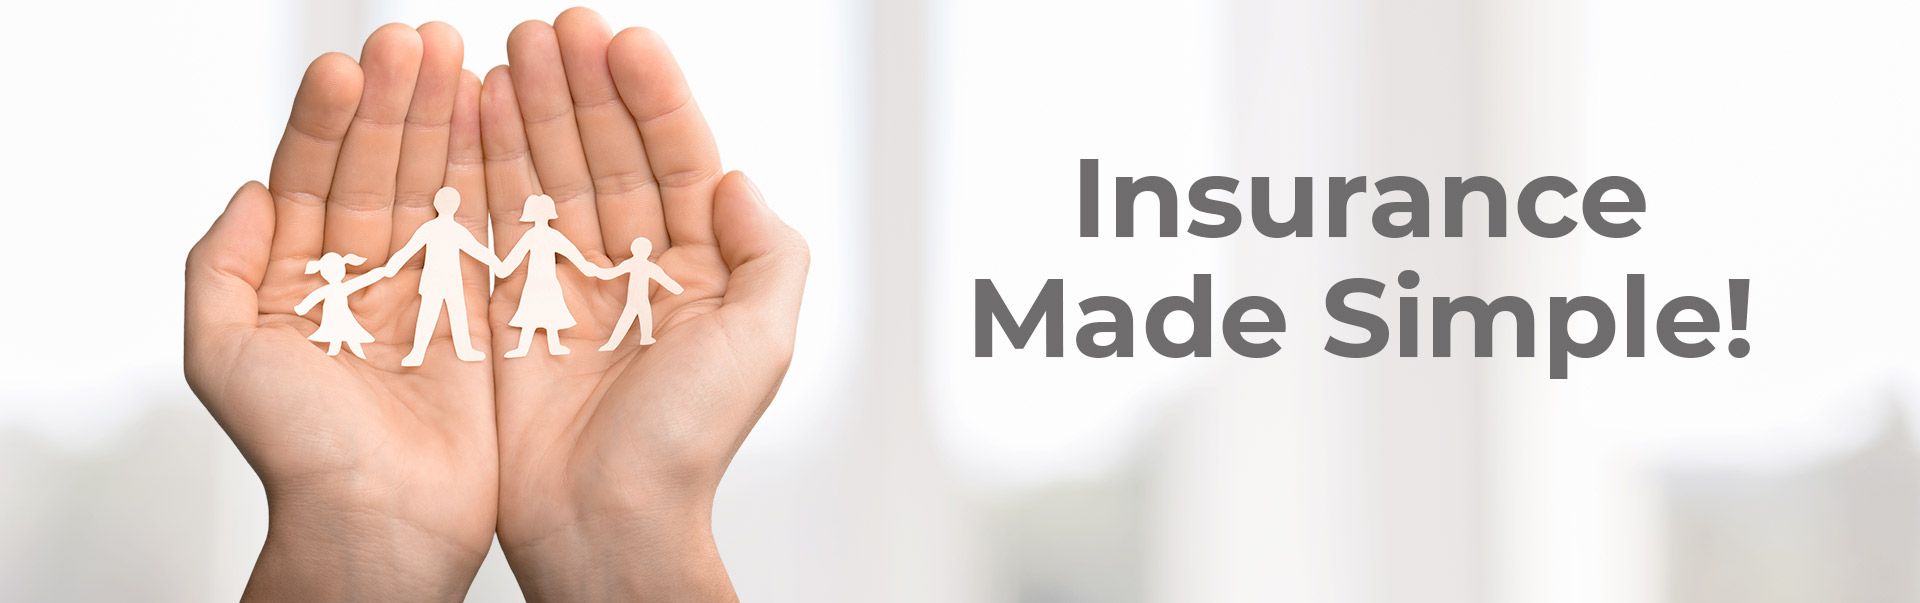 Insurance Made Simple. Young hands holding family.